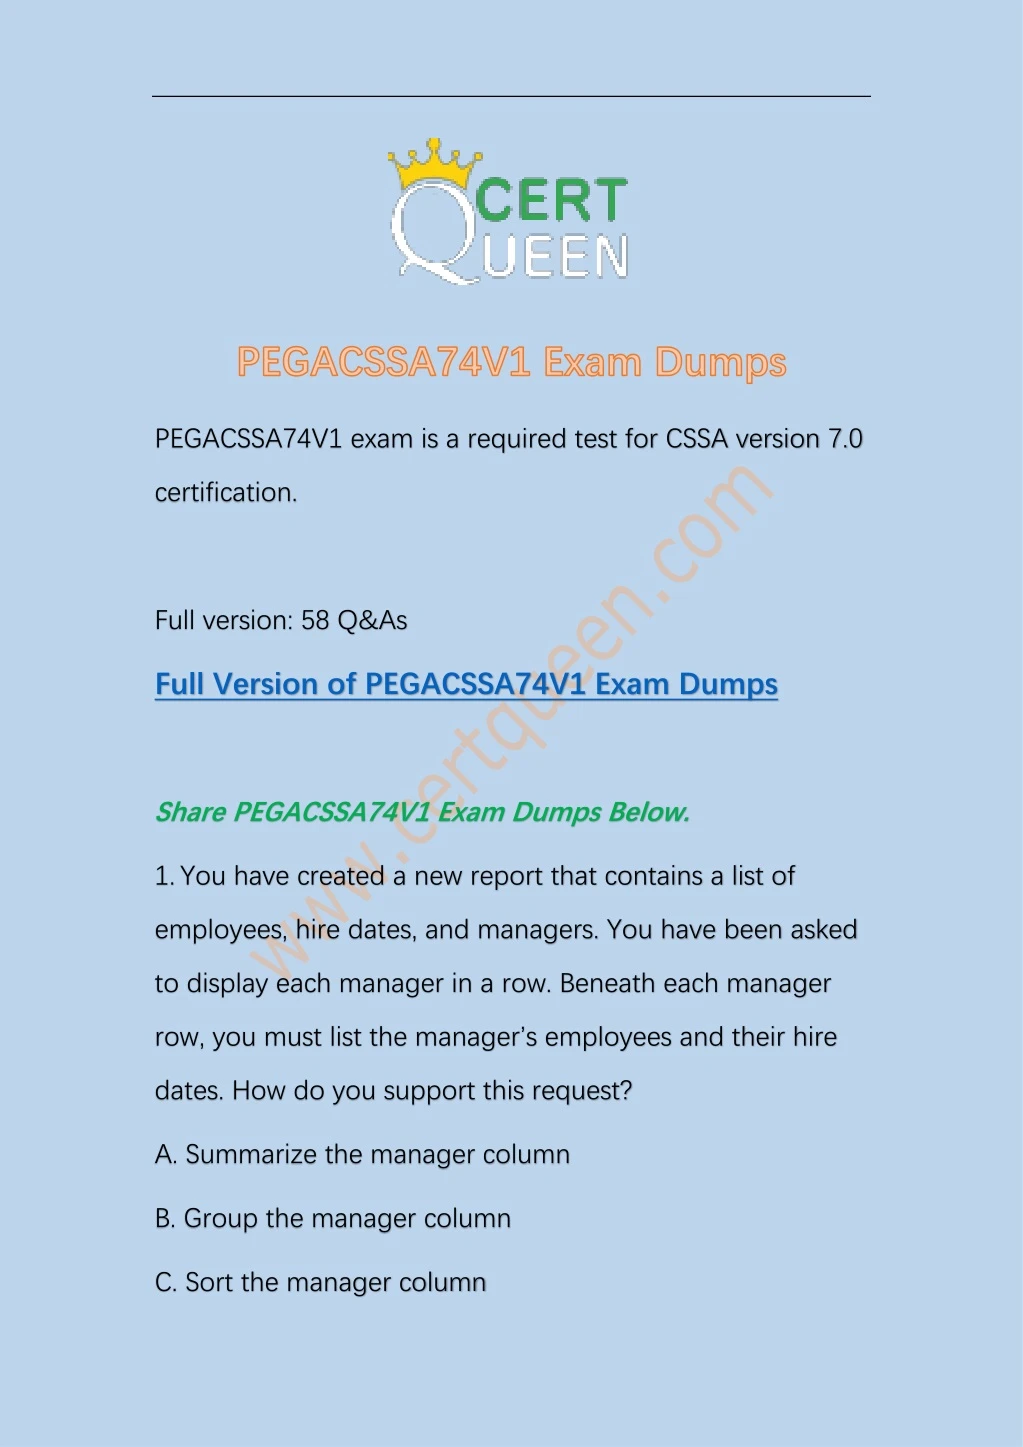 pegacssa74v1 exam is a required test for cssa